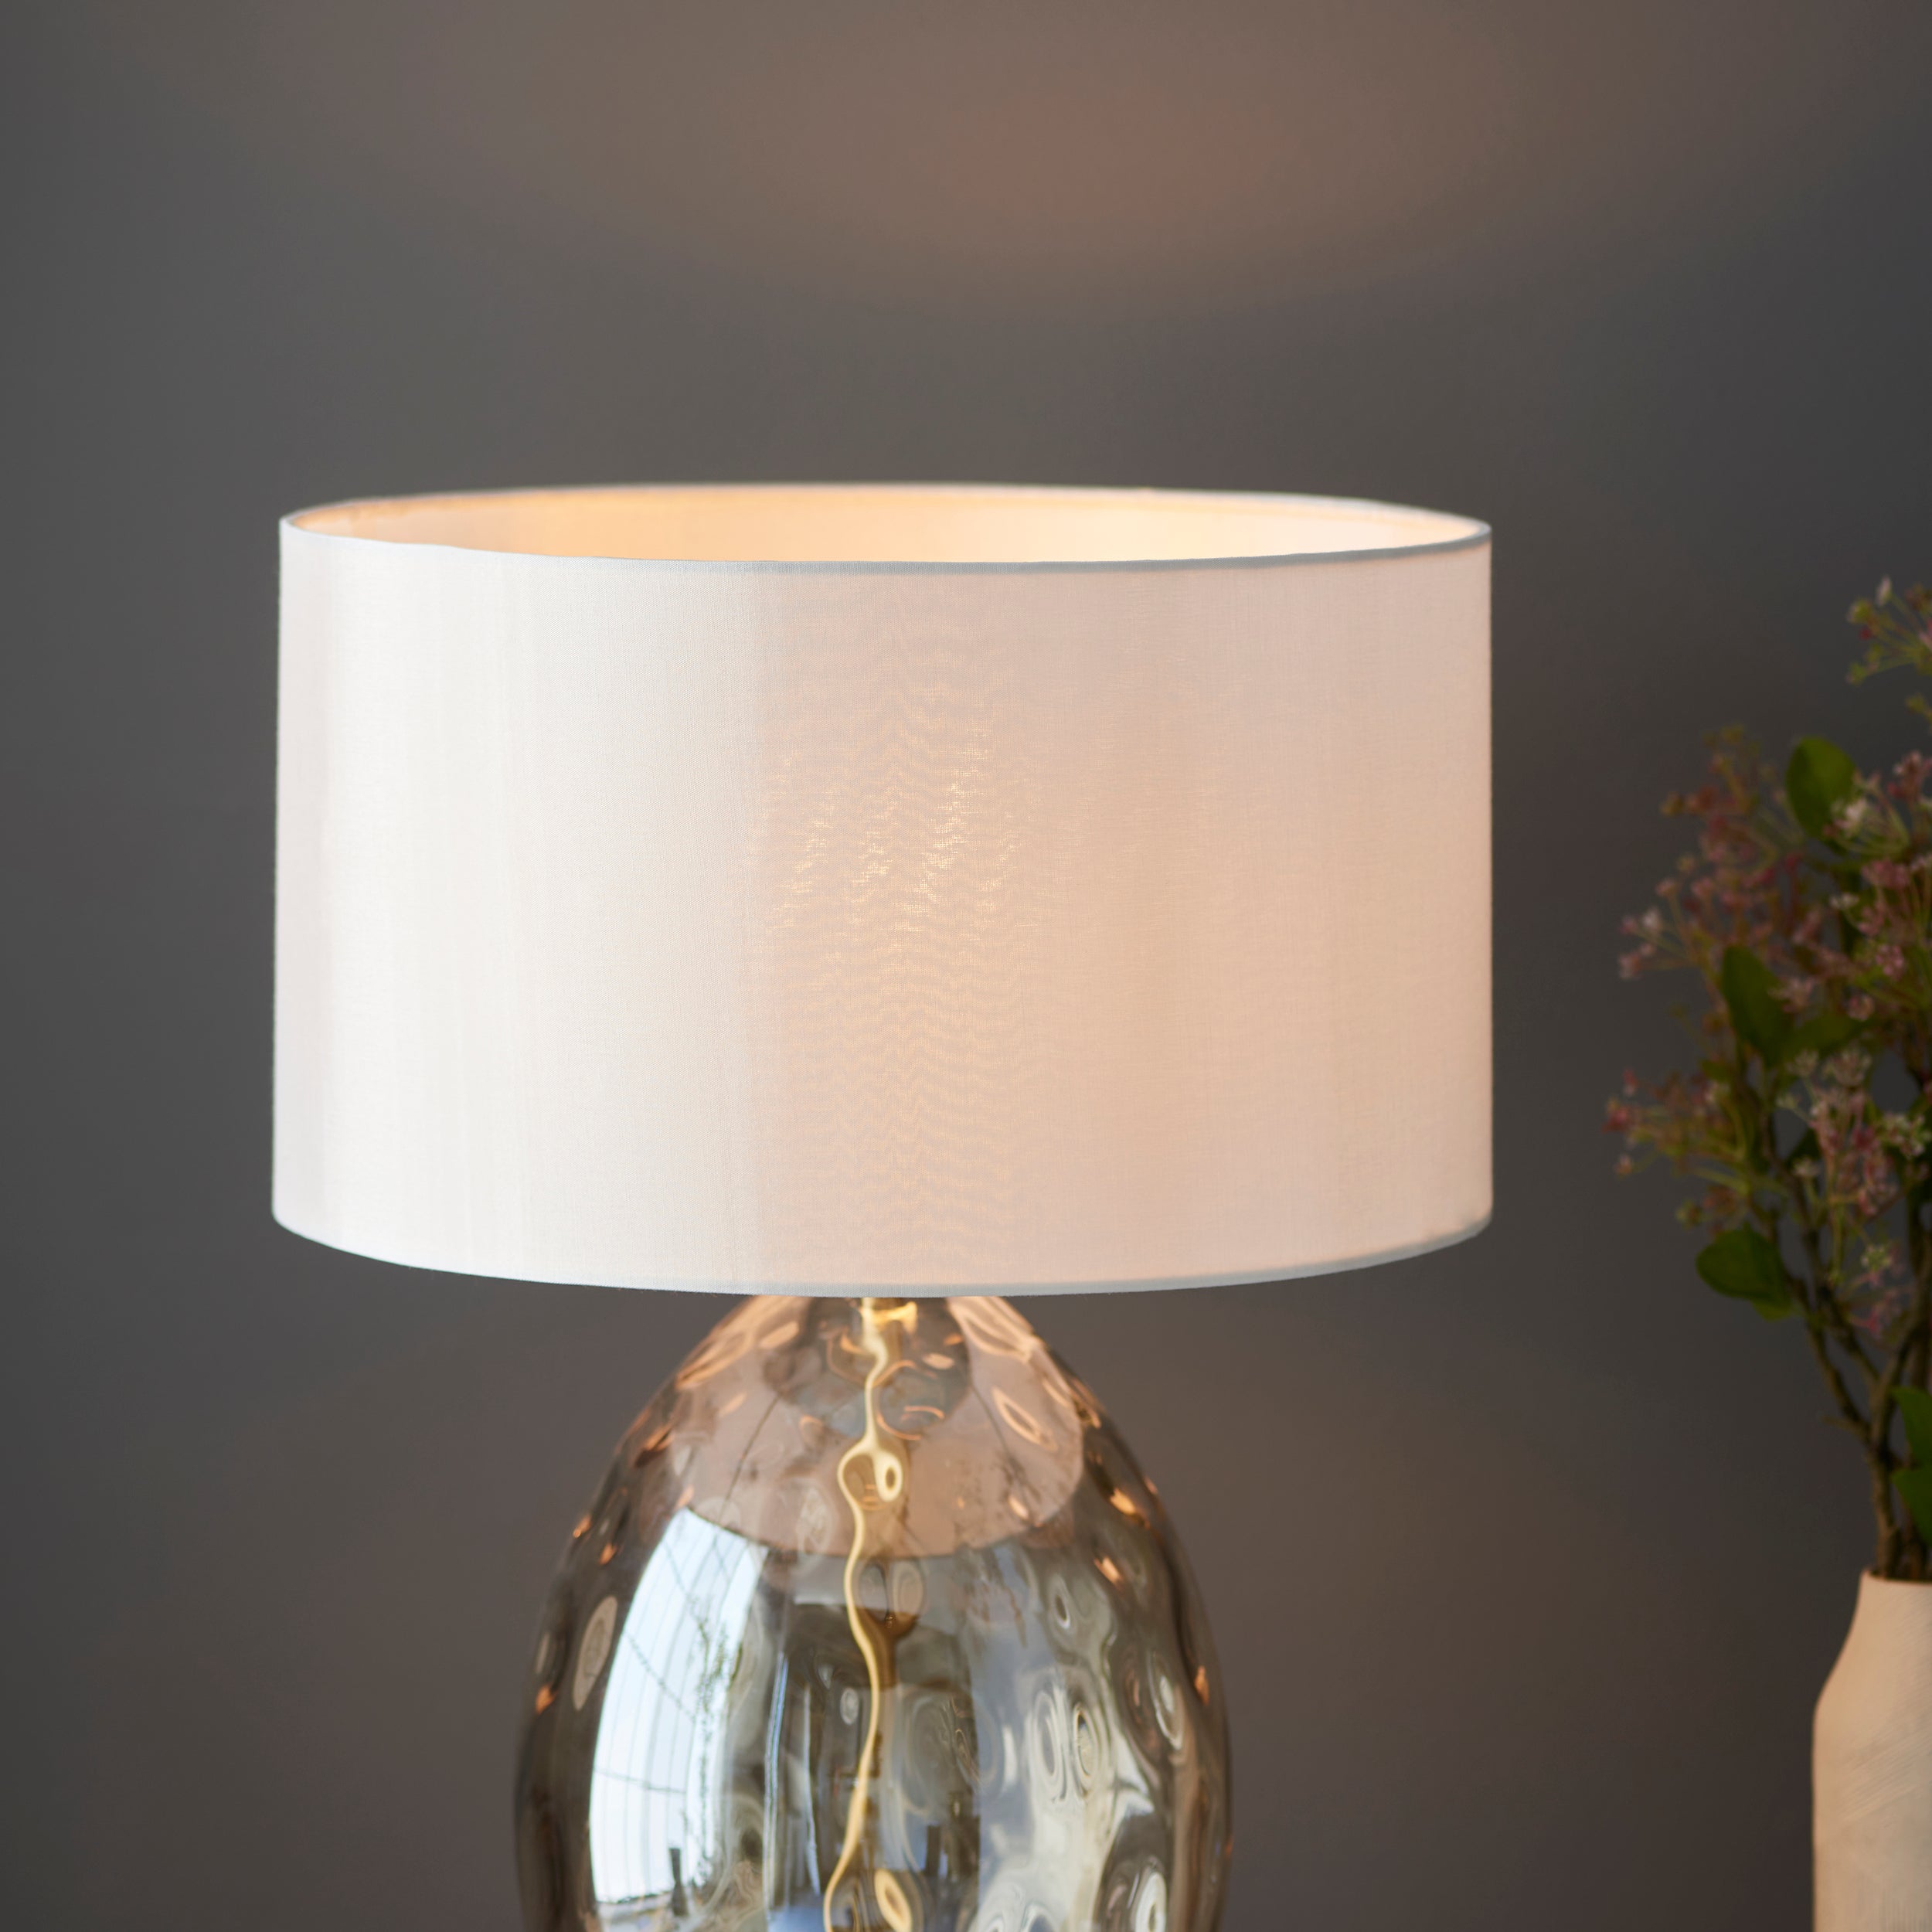 Lightologist Champagne lustre glass, satin brass plate with vintage white fabric Base & shade Table Light